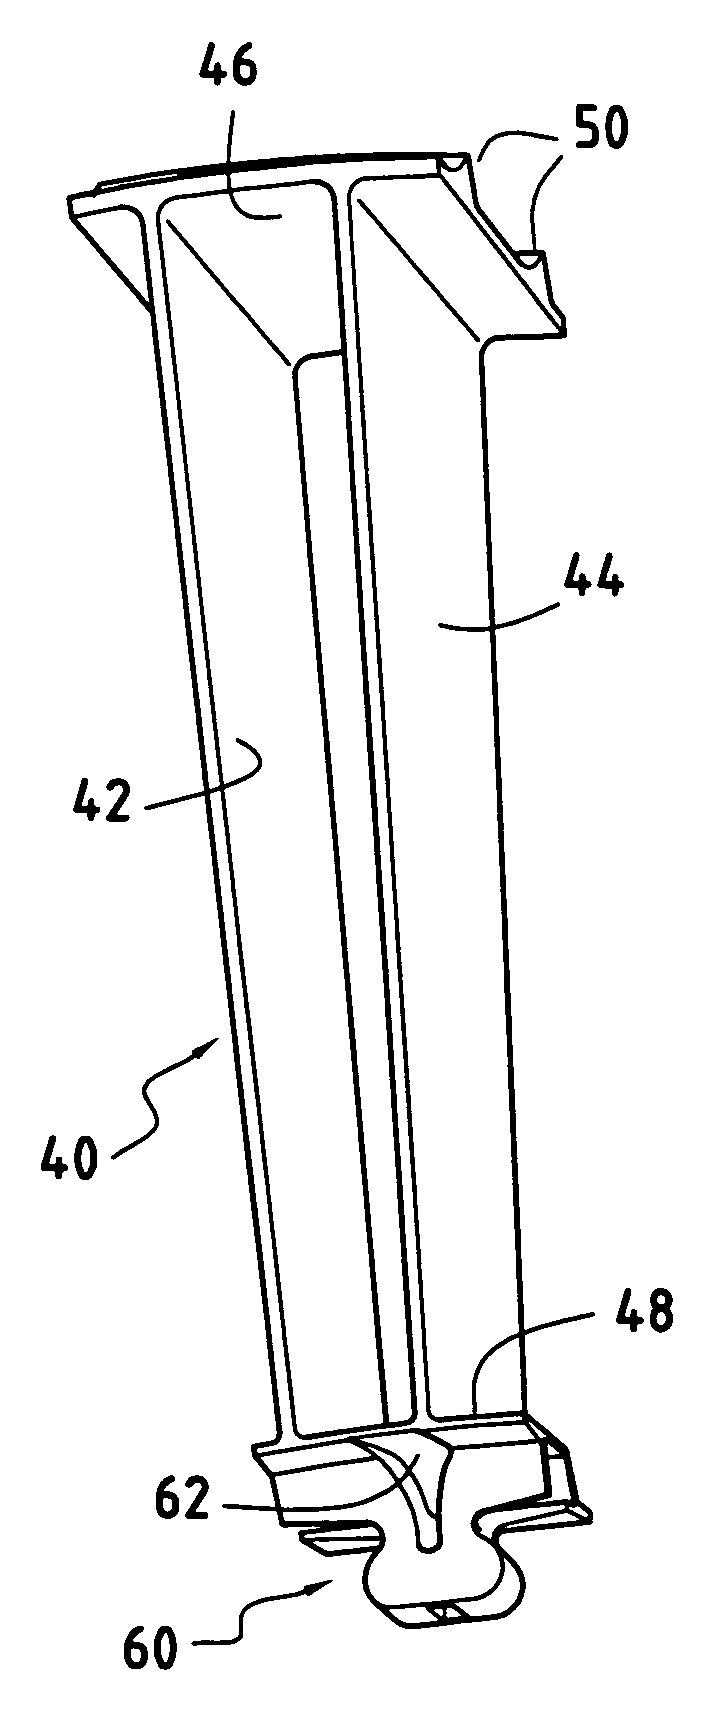 Turbomachine turbines with blade inserts having resonant frequencies that are adjusted to be different, and a method of adjusting the resonant frequency of a turbine blade insert